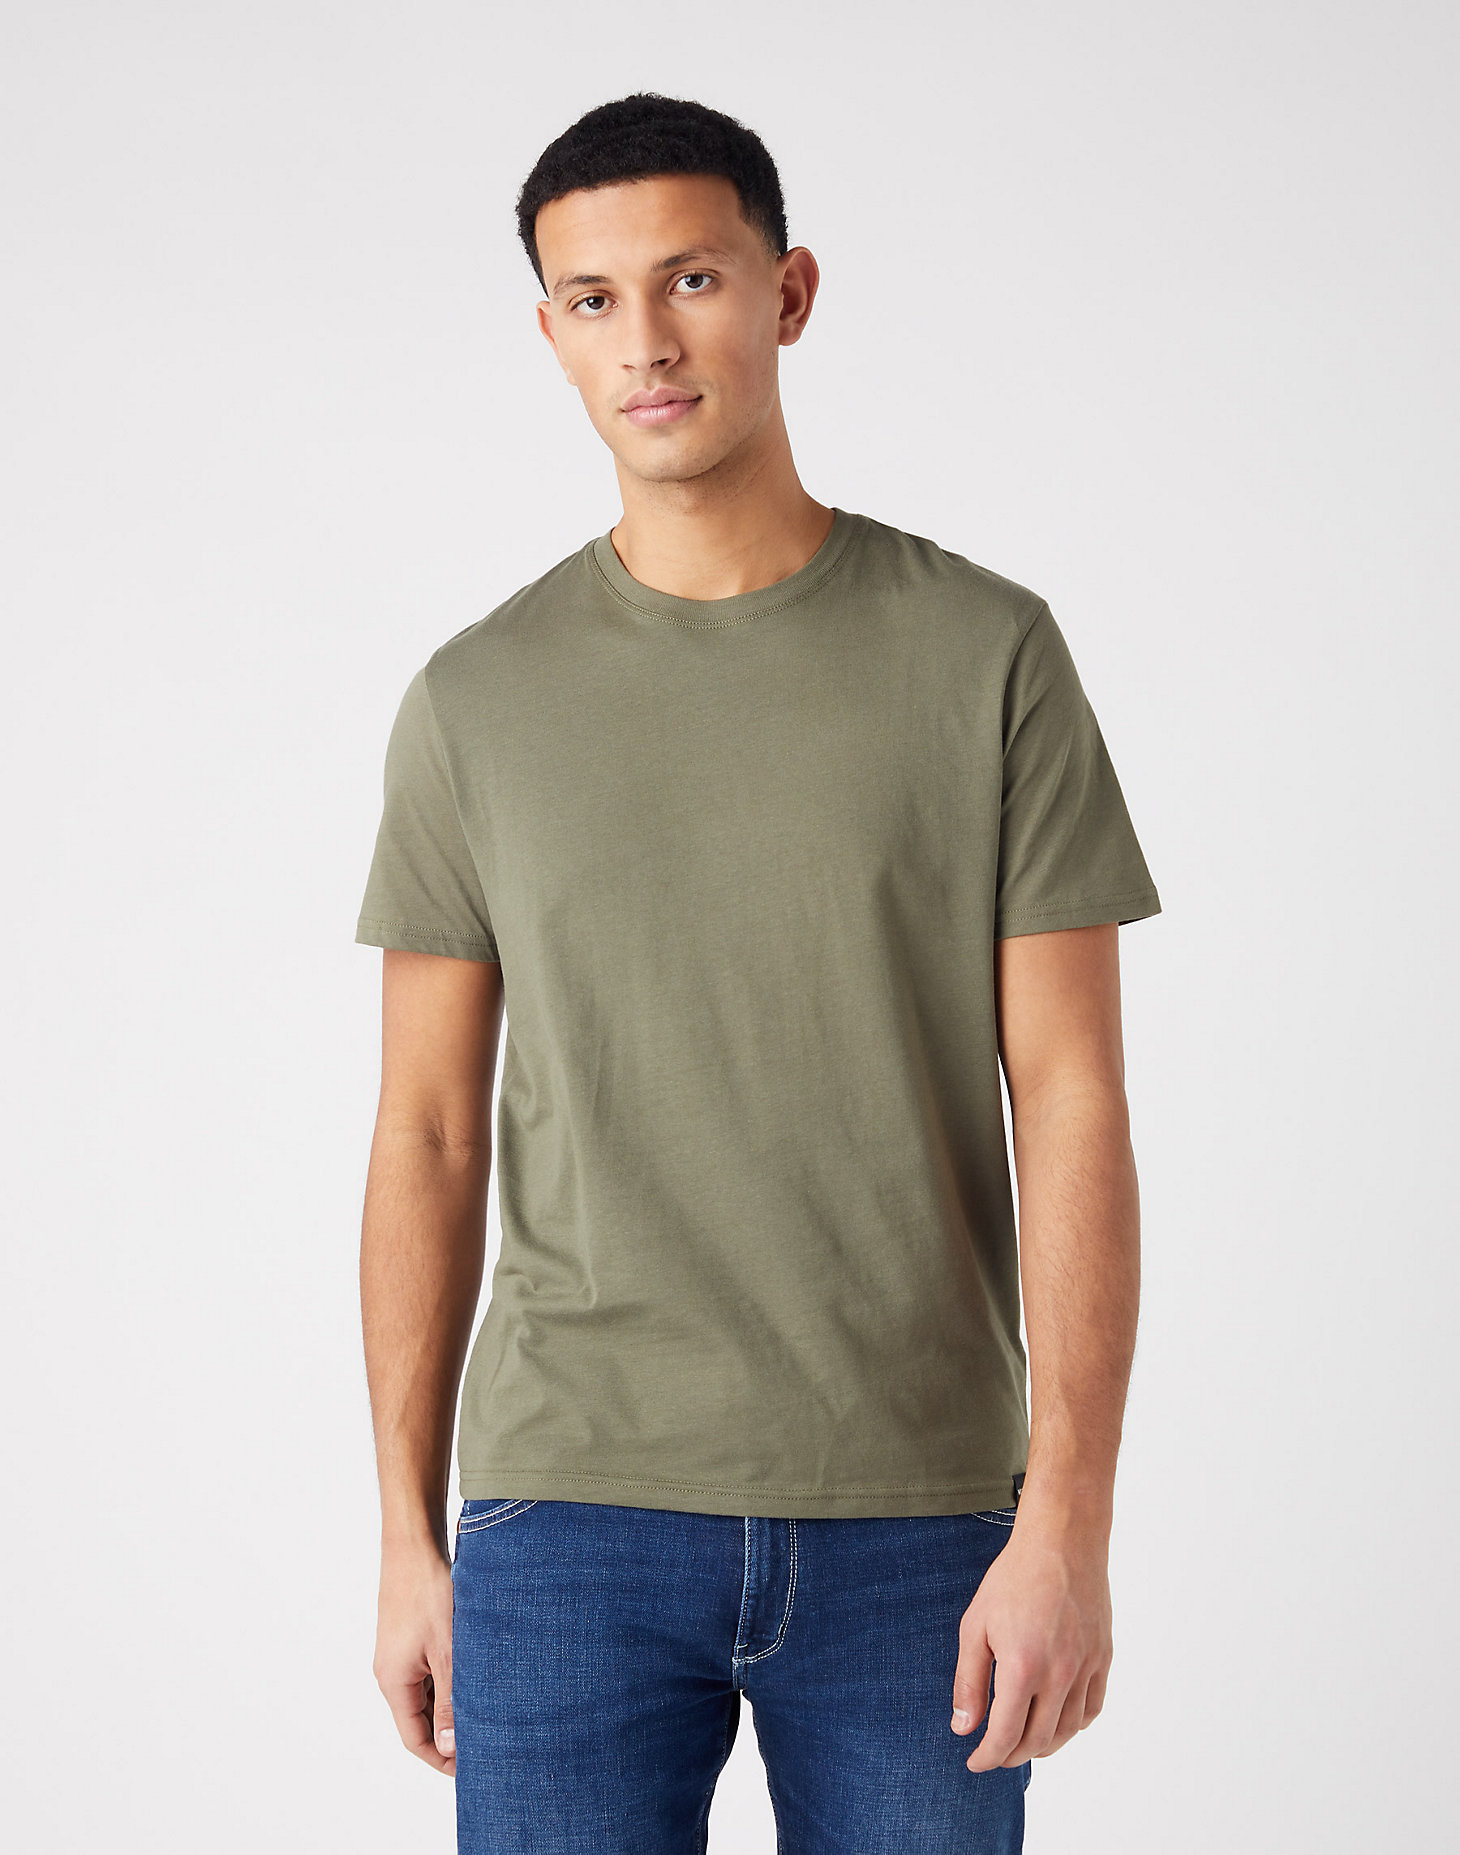 Short Sleeve Two Pack Tee in Dusty Olive and White main view